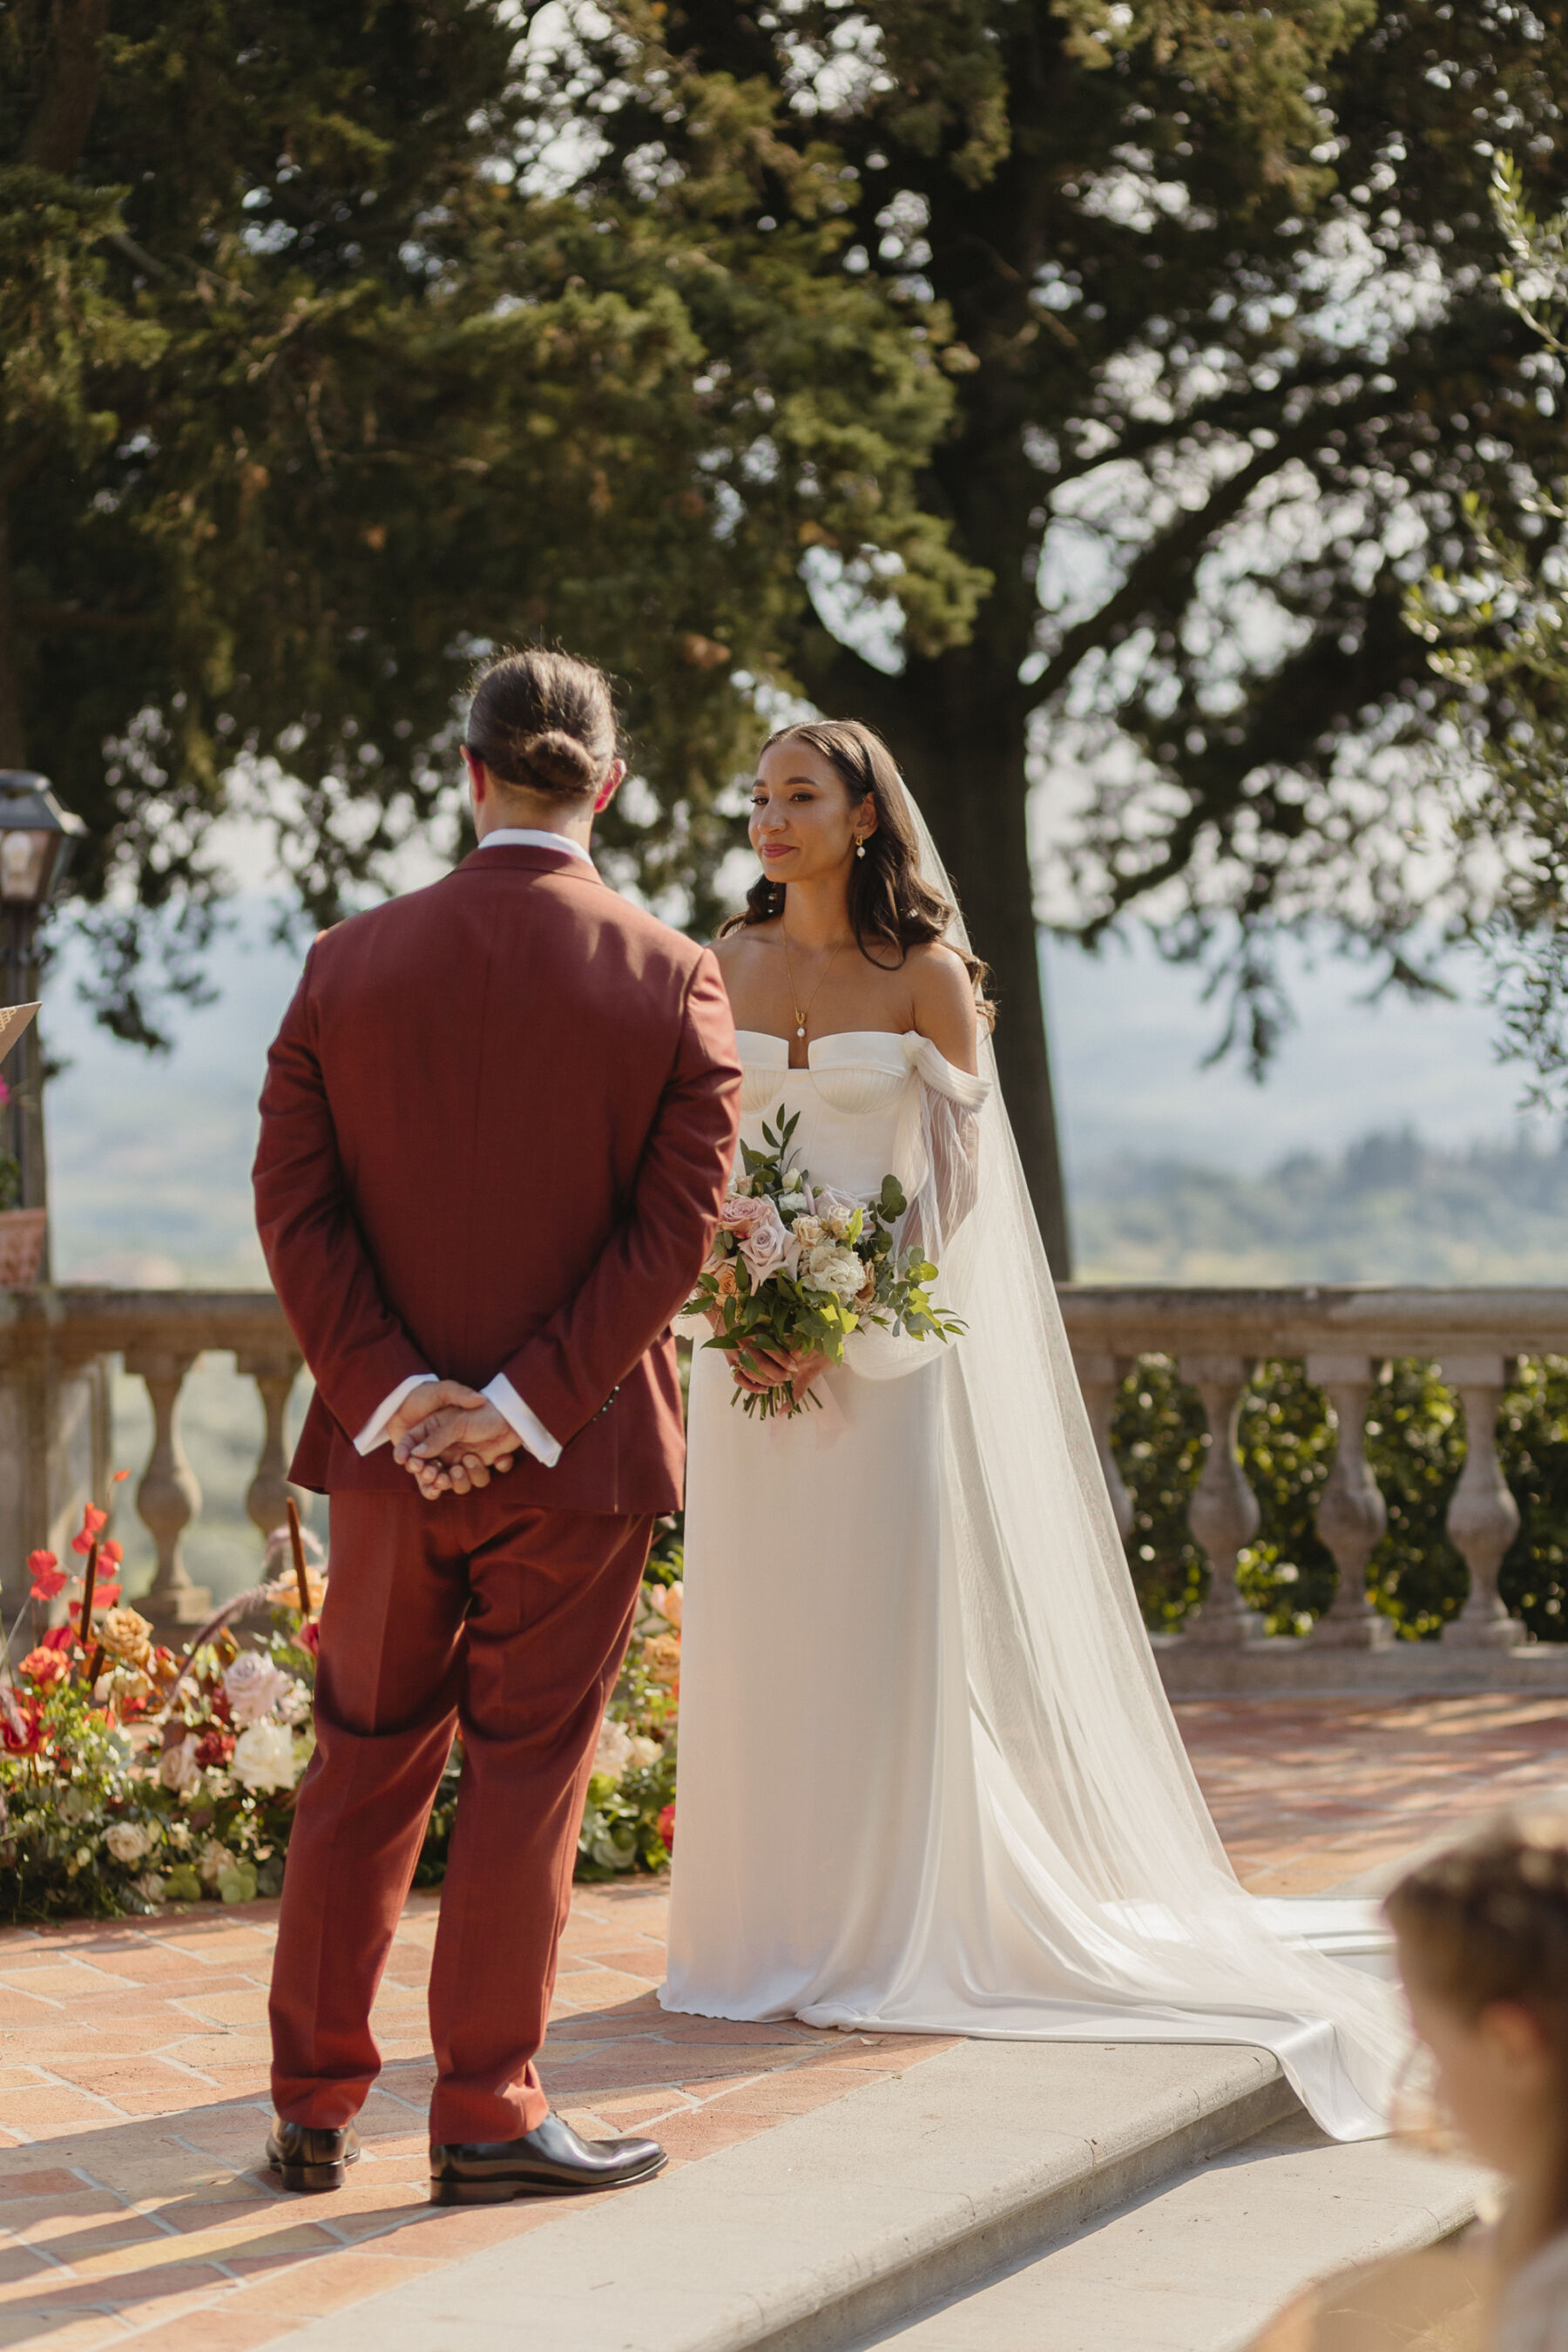 Bride and groom standing during their outdoor wedding ceremony in Tuscany, Italy. The bride wears an Alena Leena wedding dress & the groom wears a burnt orange Paul Smith suit. The bride carries a colourful and elegant bouquet at waist level.